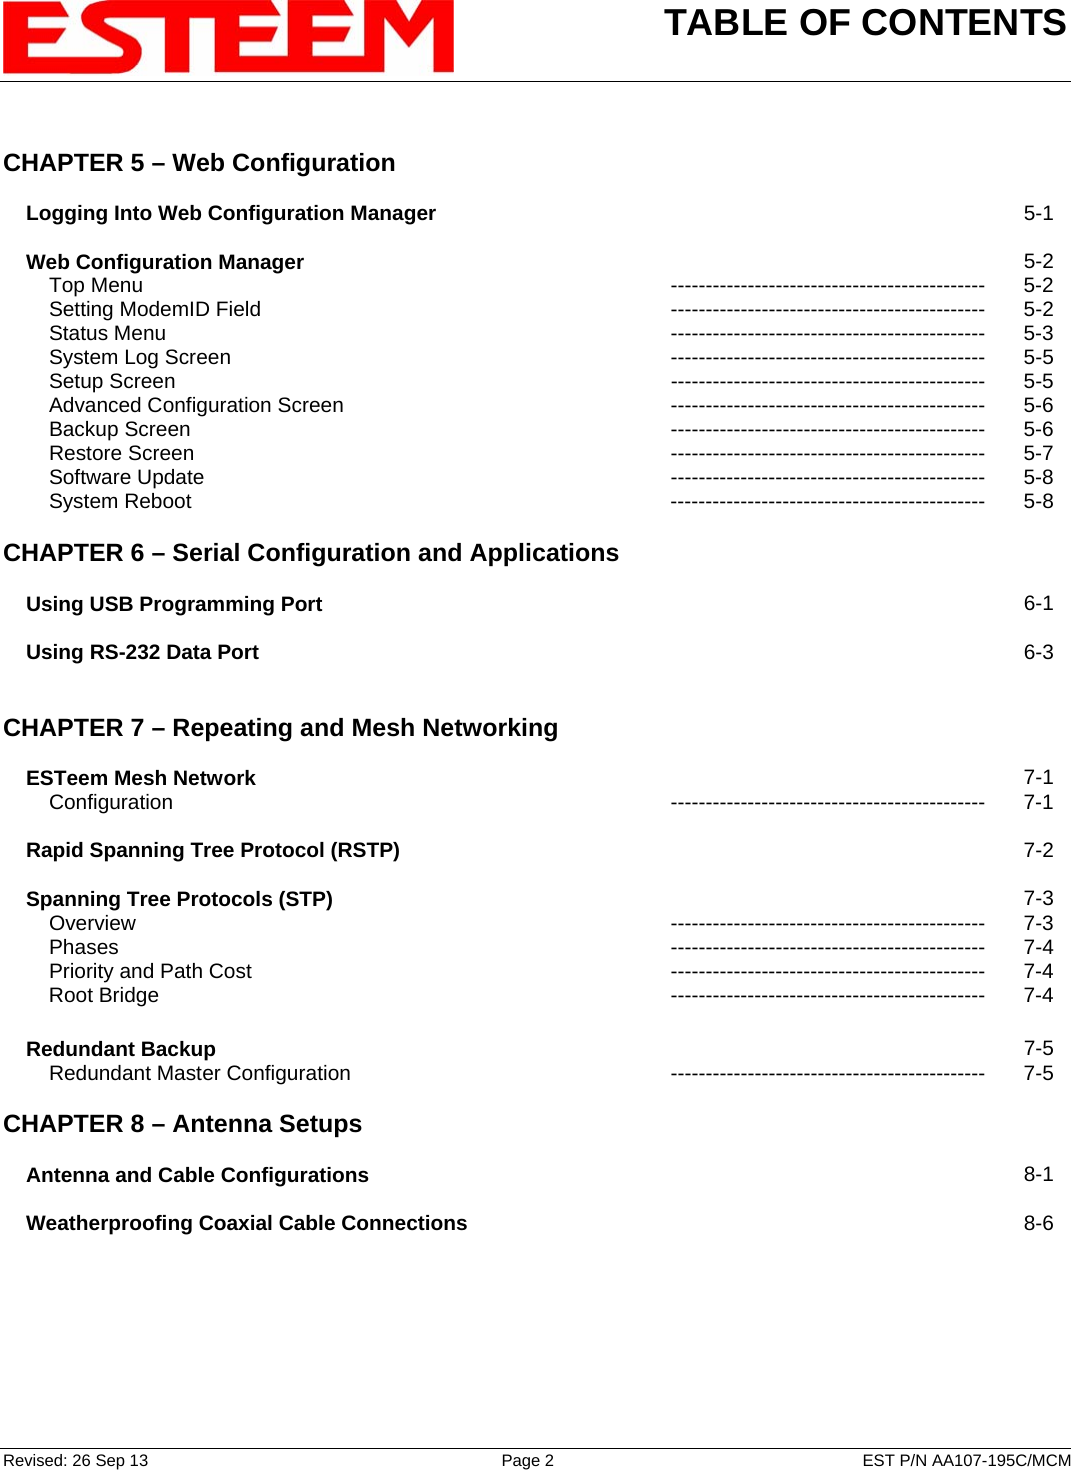 TABLE OF CONTENTS    Revised: 26 Sep 13  Page 2  EST P/N AA107-195C/MCM  CHAPTER 5 – Web Configuration         Logging Into Web Configuration Manager   5-1        Web Configuration Manager   5-2         Top Menu  ---------------------------------------------  5-2         Setting ModemID Field --------------------------------------------- 5-2         Status Menu  ---------------------------------------------  5-3         System Log Screen --------------------------------------------- 5-5         Setup Screen  ---------------------------------------------  5-5         Advanced Configuration Screen --------------------------------------------- 5-6         Backup Screen  ---------------------------------------------  5-6         Restore Screen  ---------------------------------------------  5-7         Software Update --------------------------------------------- 5-8         System Reboot --------------------------------------------- 5-8    CHAPTER 6 – Serial Configuration and Applications         Using USB Programming Port   6-1        Using RS-232 Data Port   6-3       CHAPTER 7 – Repeating and Mesh Networking          ESTeem Mesh Network   7-1         Configuration --------------------------------------------- 7-1        Rapid Spanning Tree Protocol (RSTP)   7-2        Spanning Tree Protocols (STP)   7-3         Overview --------------------------------------------- 7-3         Phases --------------------------------------------- 7-4         Priority and Path Cost --------------------------------------------- 7-4         Root Bridge --------------------------------------------- 7-4        Redundant Backup   7-5         Redundant Master Configuration --------------------------------------------- 7-5    CHAPTER 8 – Antenna Setups          Antenna and Cable Configurations   8-1        Weatherproofing Coaxial Cable Connections   8-6       